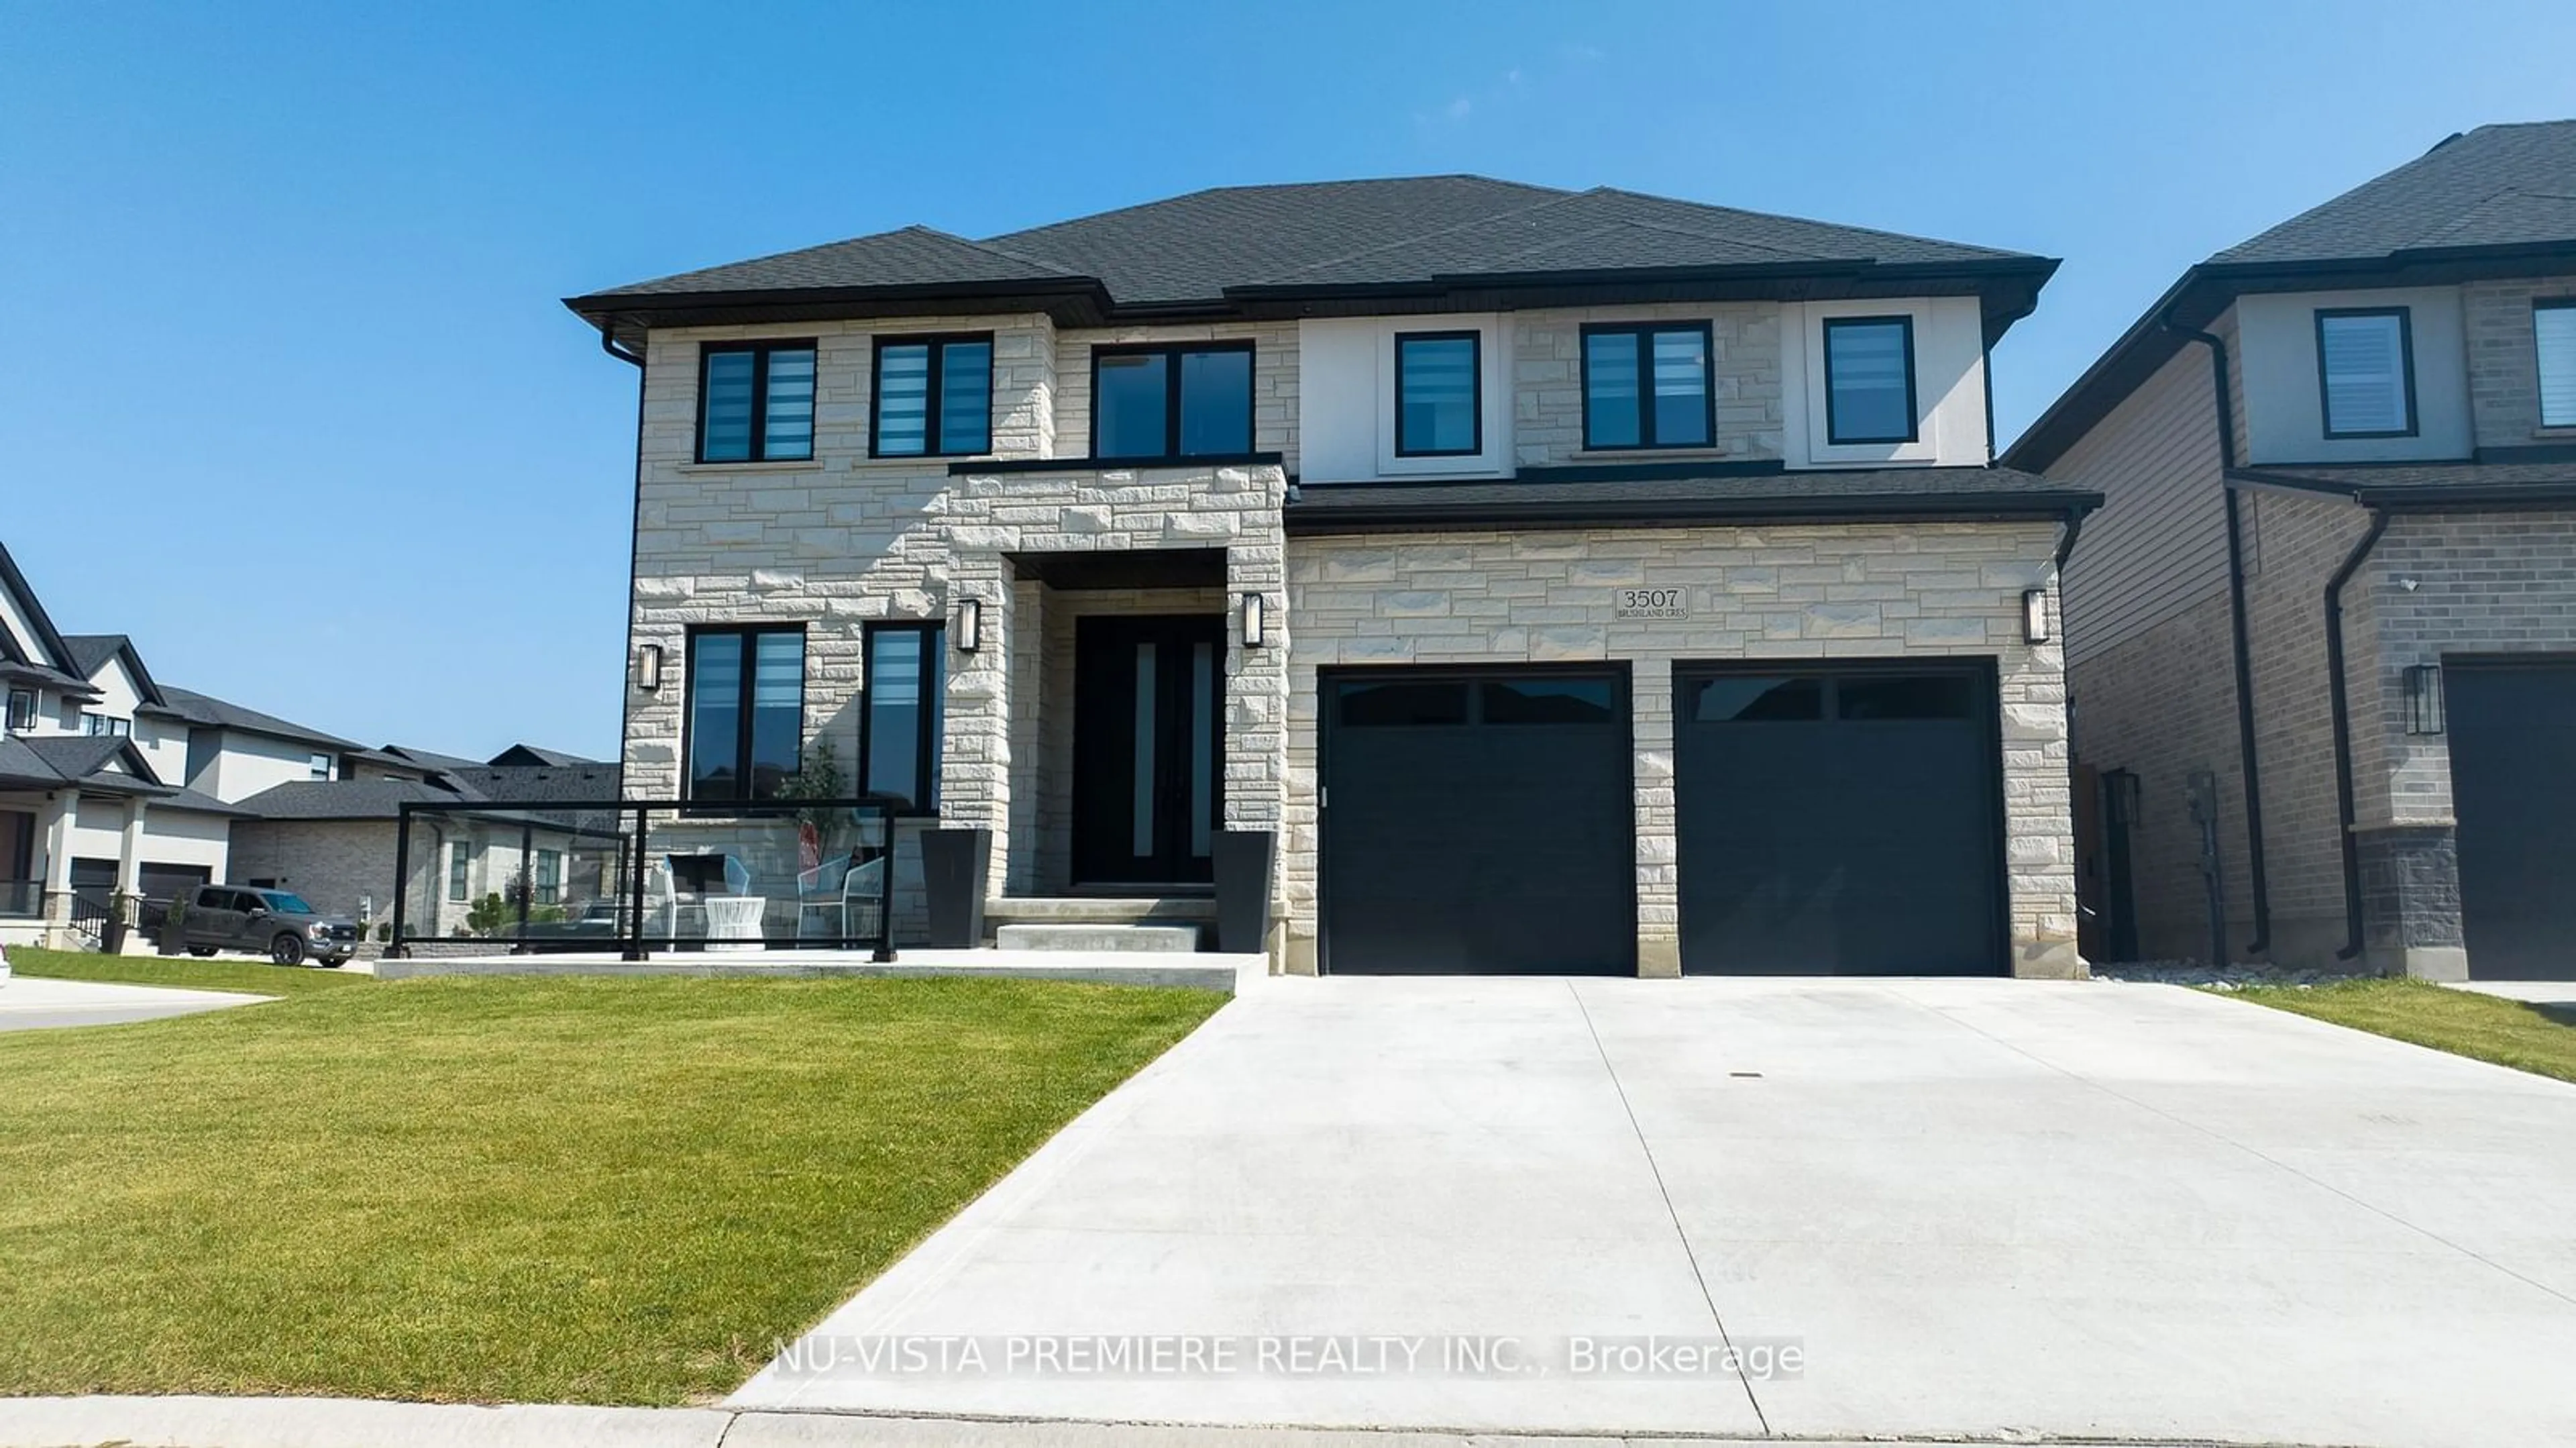 Frontside or backside of a home for 3507 Brushland Cres, London Ontario N6P 0H2